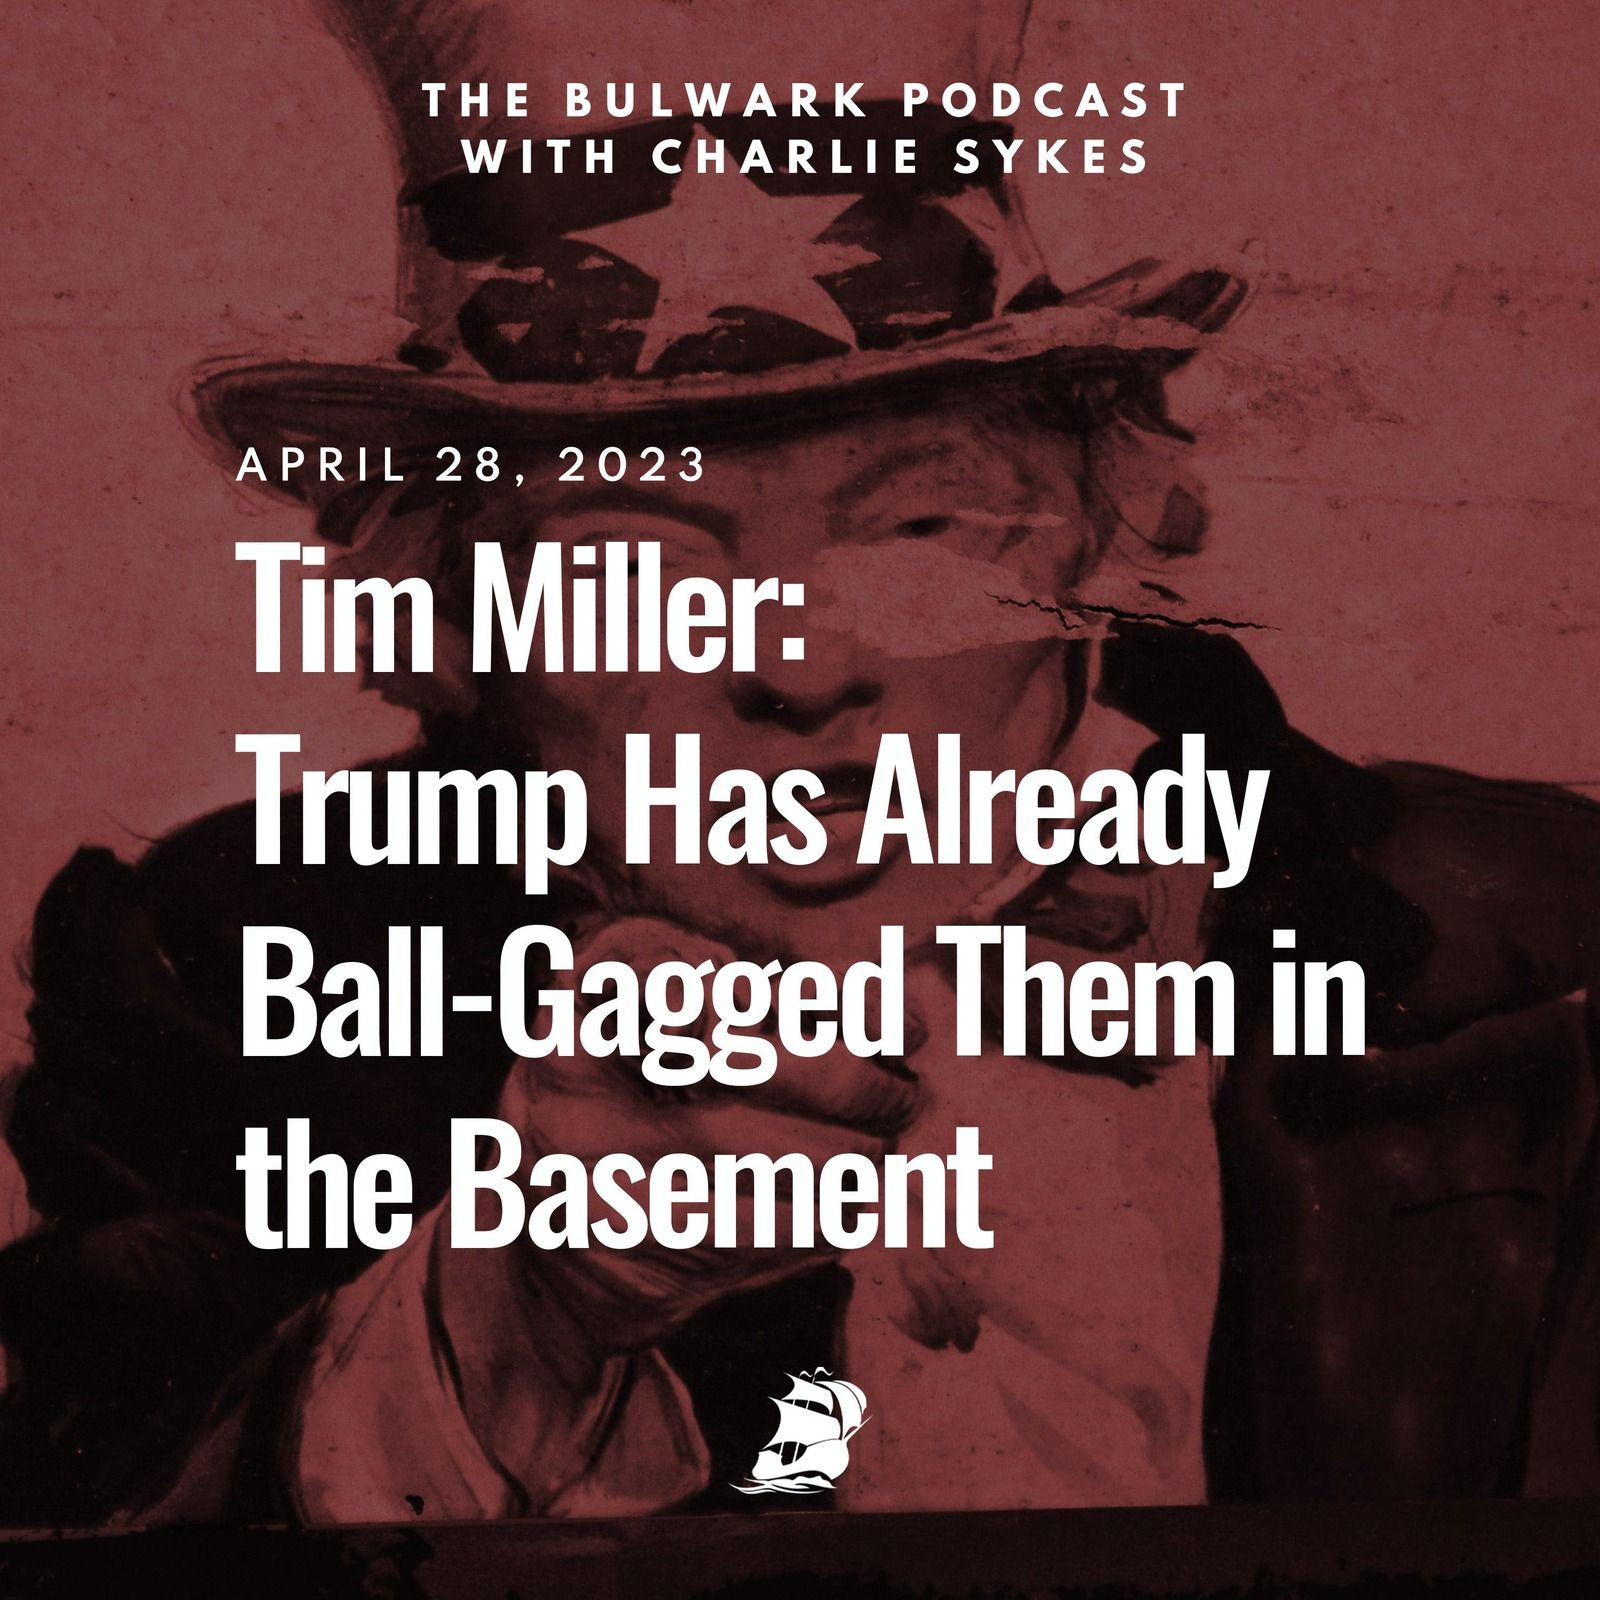 Tim Miller: Trump Has Already Ball-Gagged Them in the Basement by The Bulwark Podcast